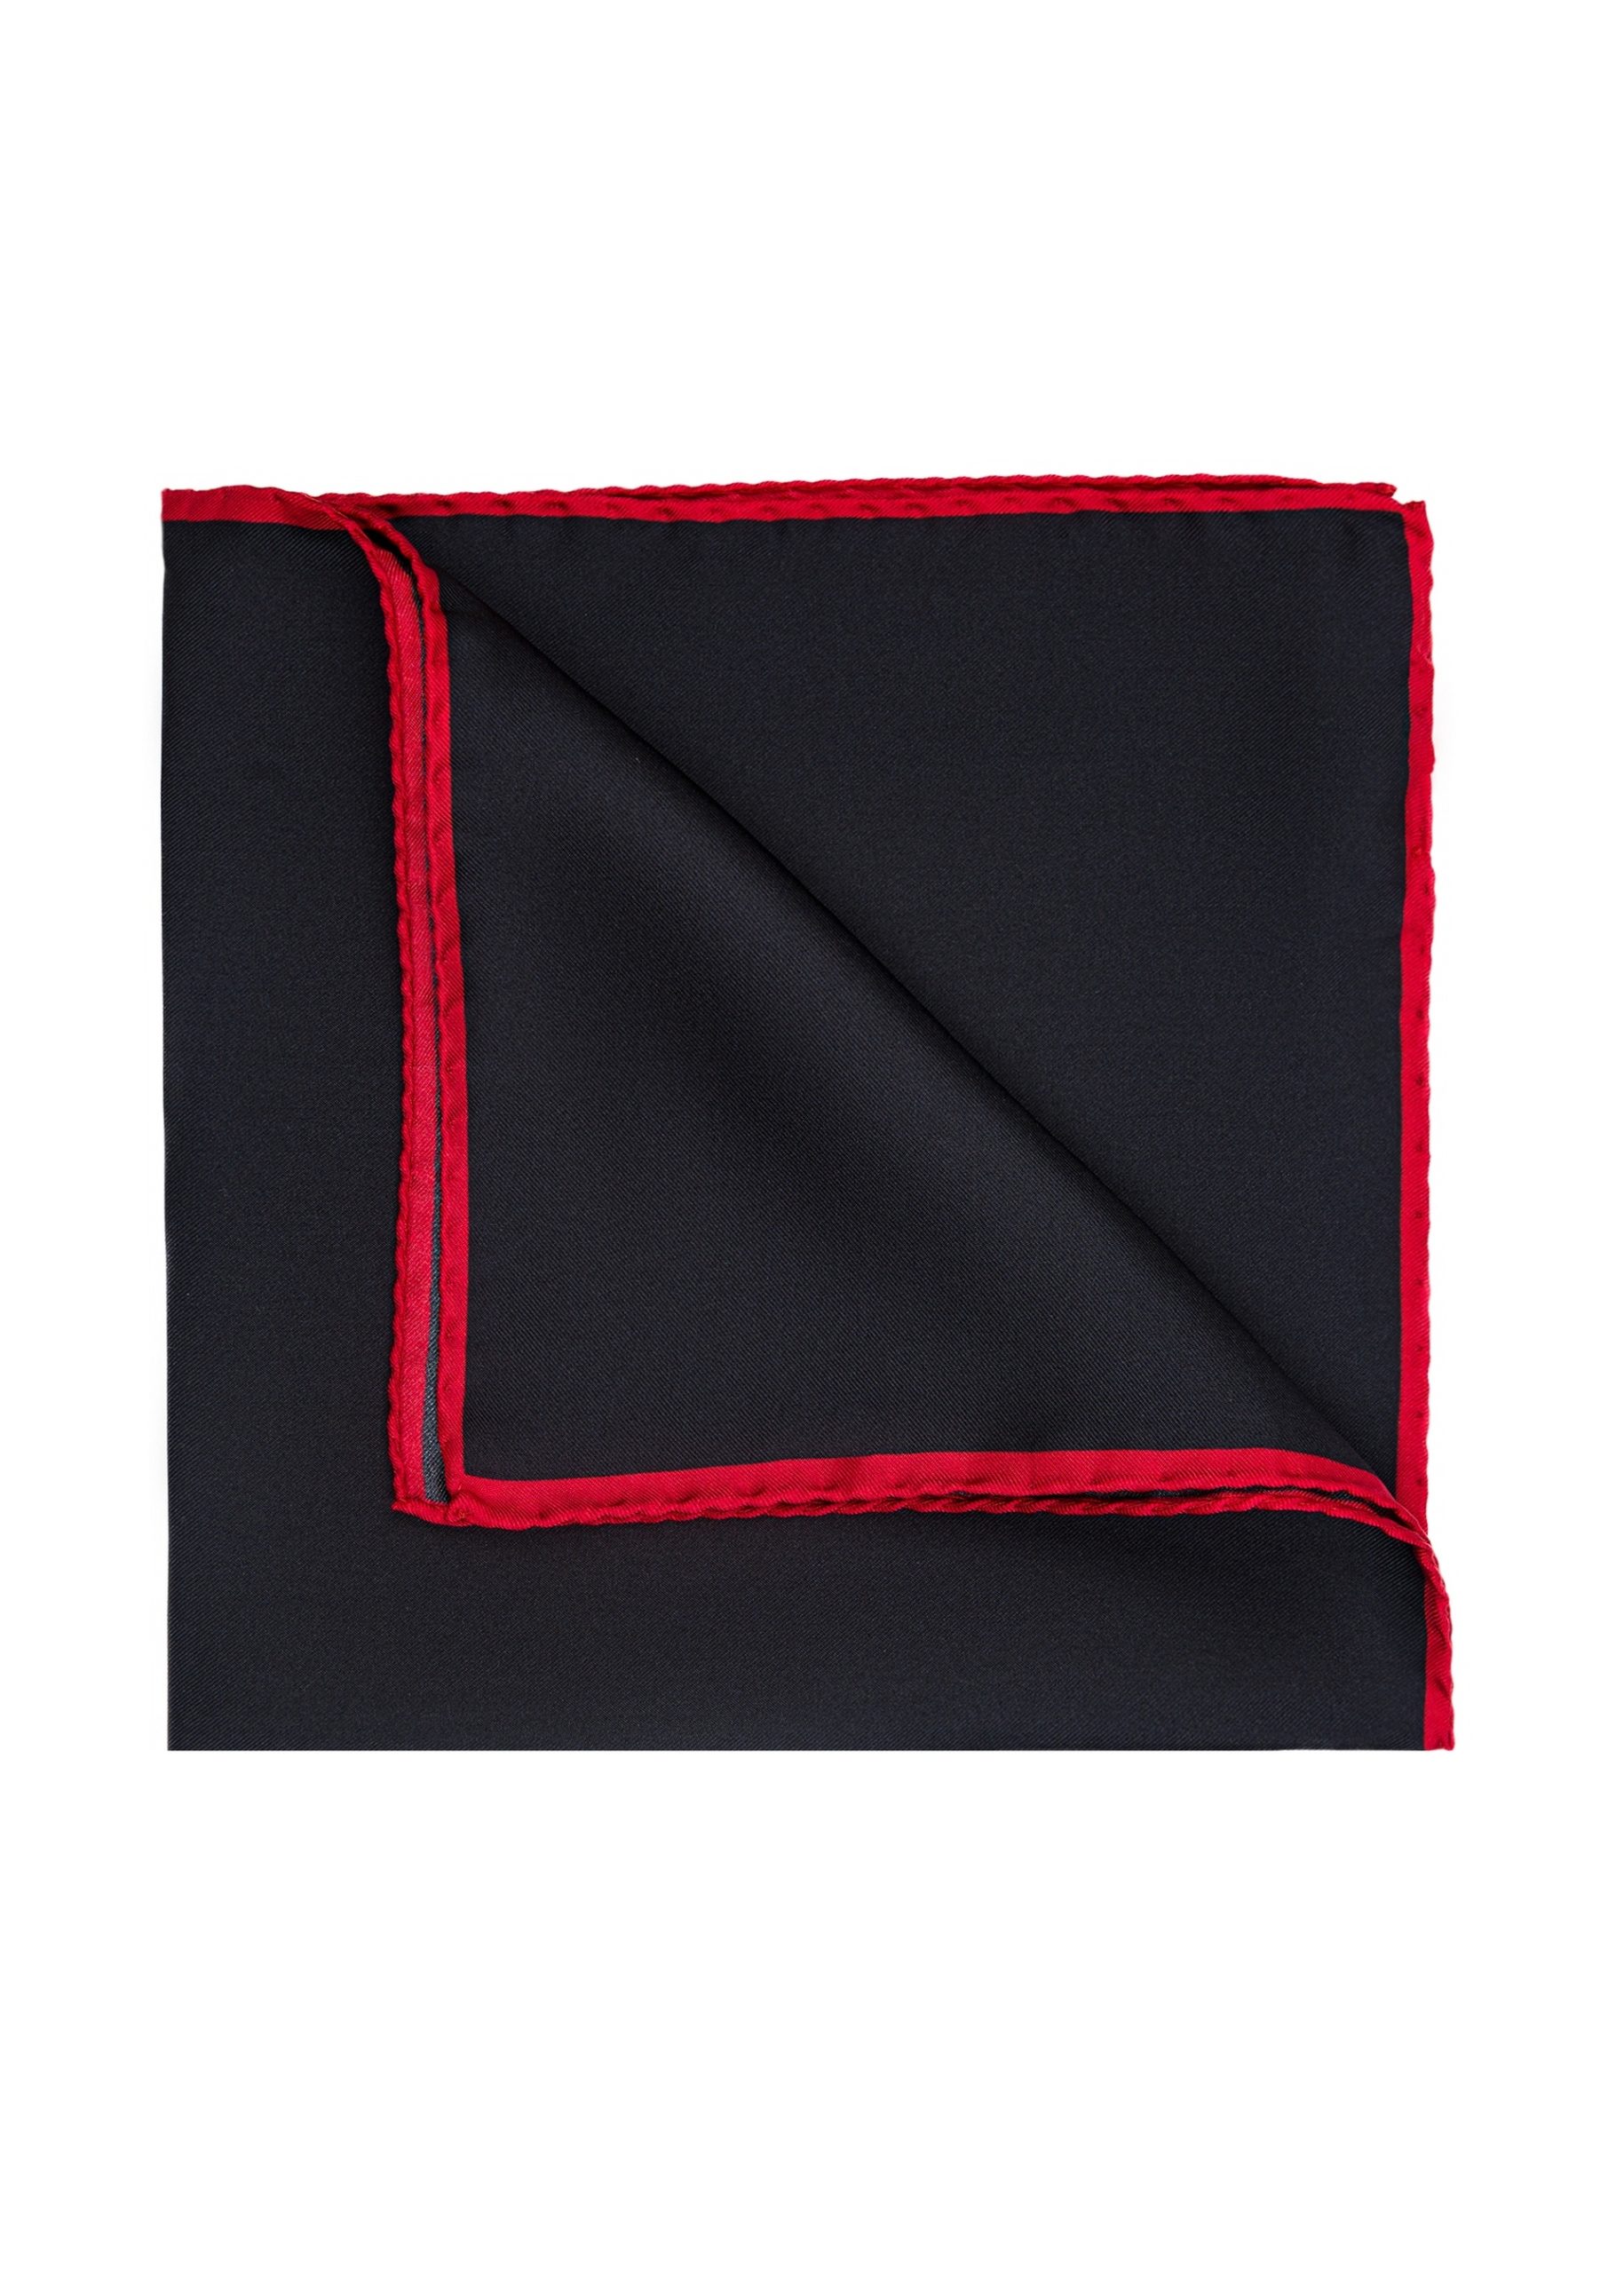 Roderick Charles navy and red silk pocket square